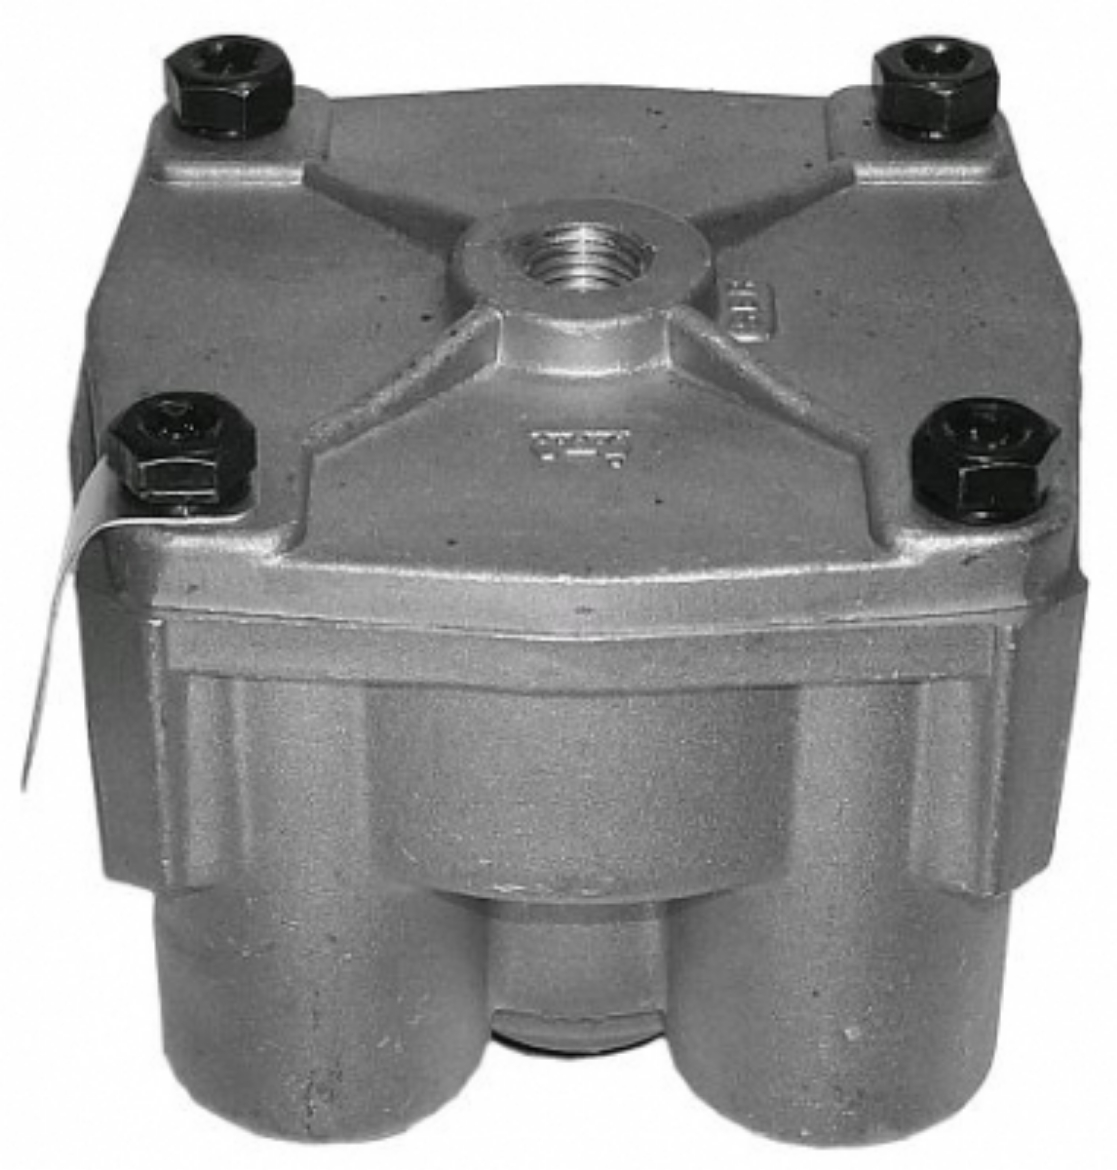 Picture of RELAY VALVE R12 STYLE 4PSI CRACK PRESSURE
(REPLACES 102626, 102277)